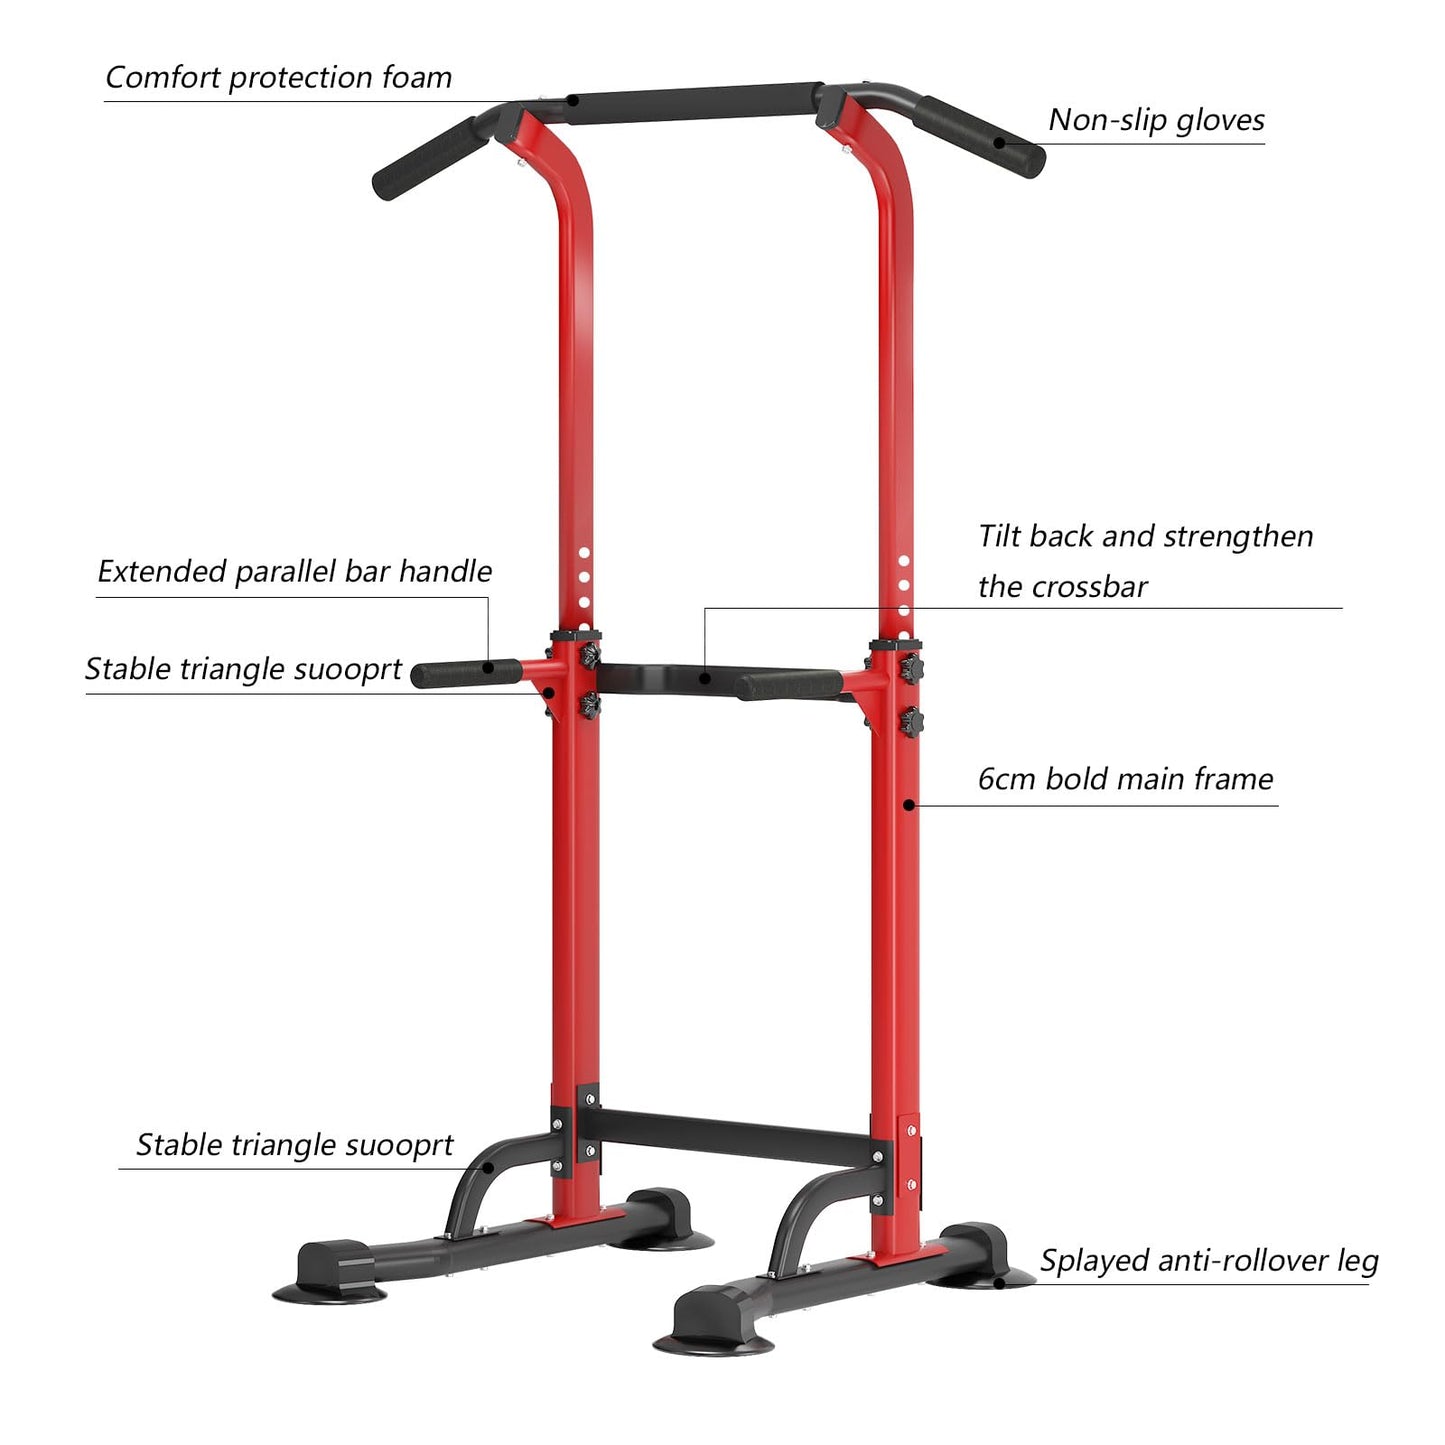 SogesHome Power Tower Pull Up Bar and Dip Station Adjustable Height Dip Stand Multi-Functional Strength Training Fitness Workout Station, Red